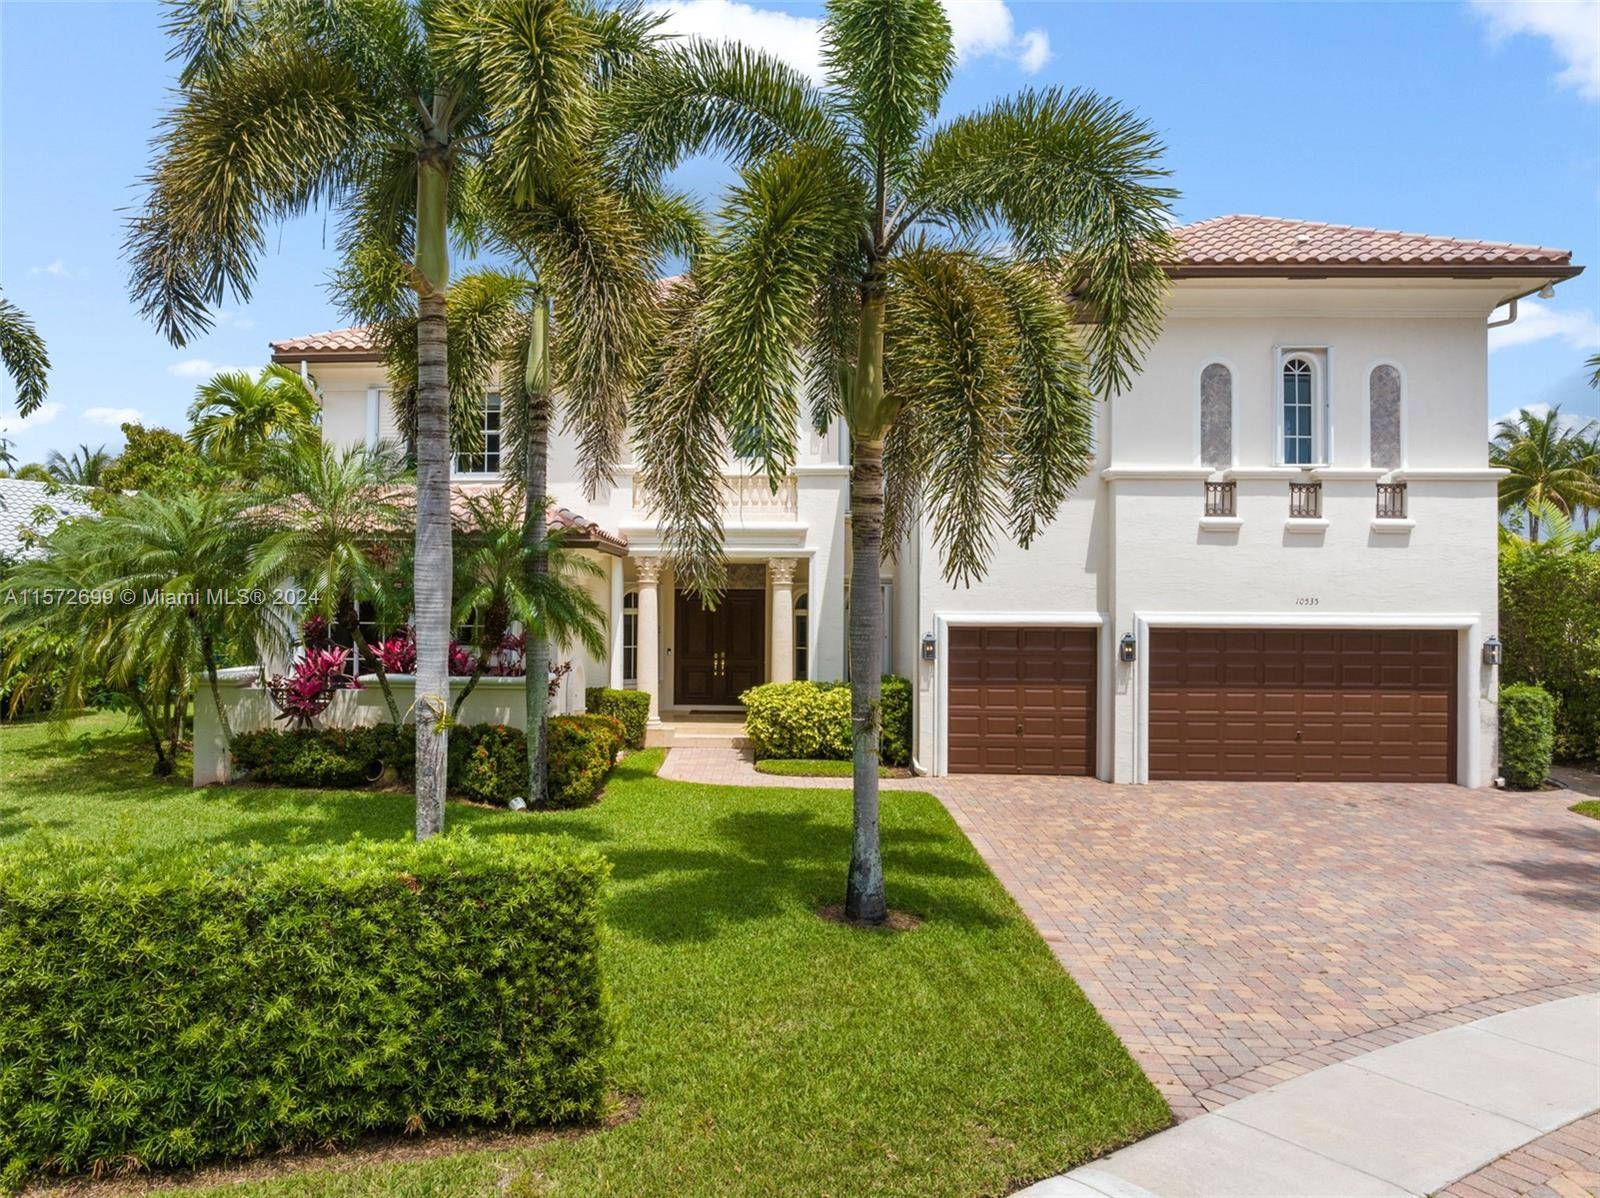 READY TO MOVE IN. Prestigious Hawks Landing community of Plantation, Florida, this stunning 6 bedroom, 7 1 bathroom office estate, offers a lifestyle of unparalleled luxury and comfort.